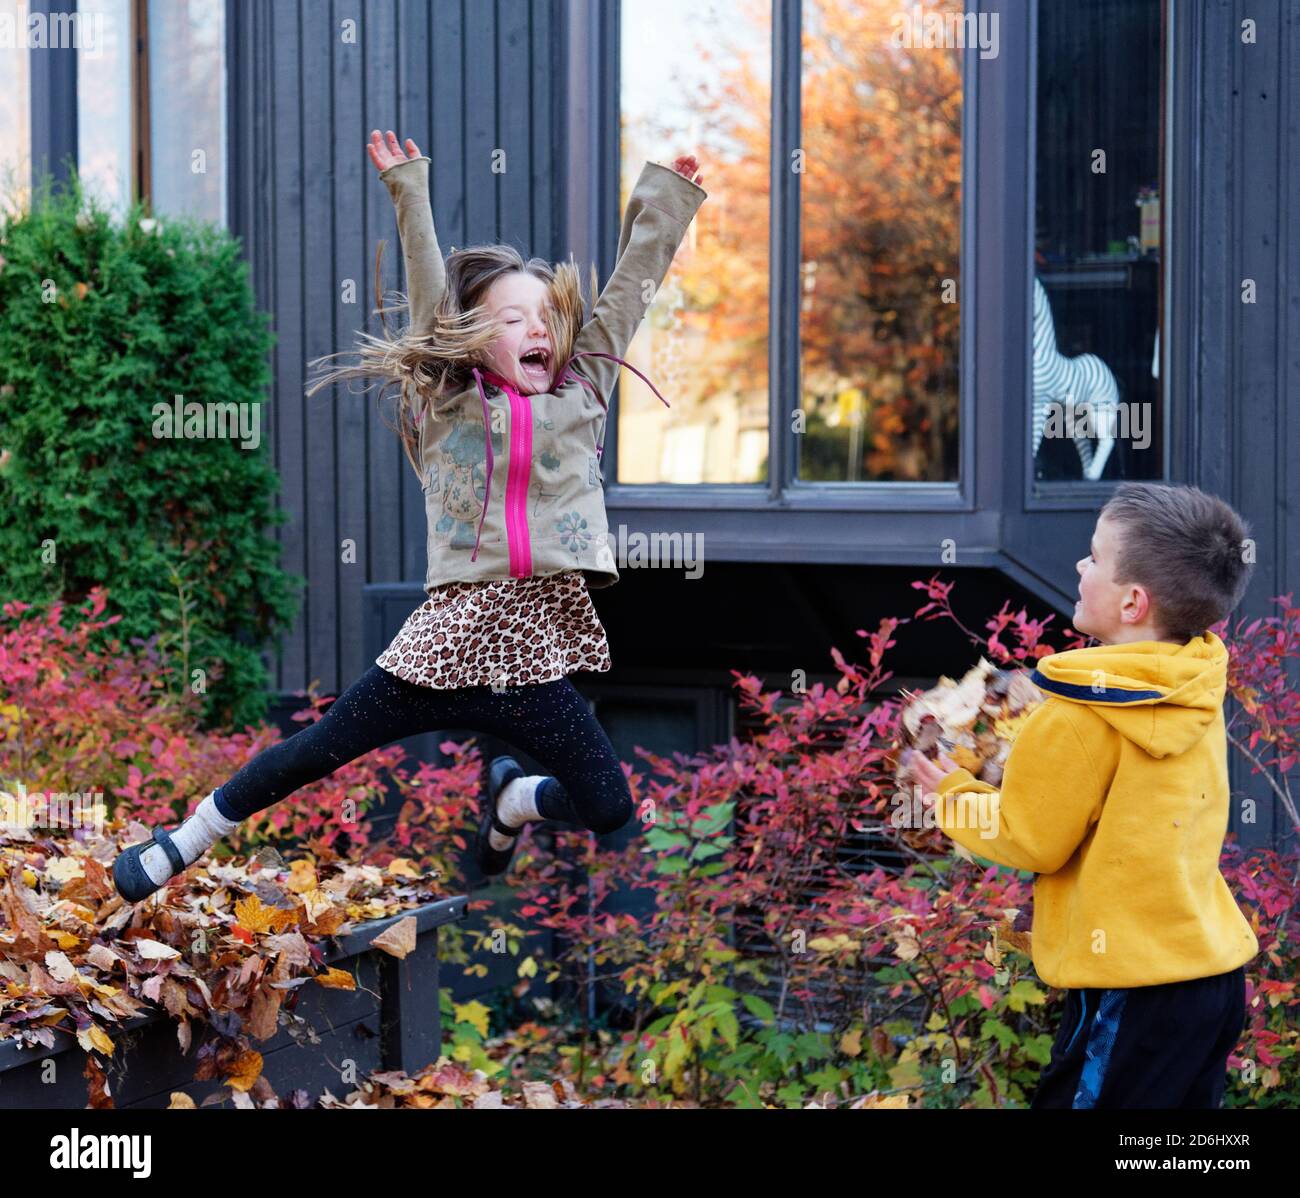 A six year old girl, watched by her brother, doing a star jump into a pile of autumn leaves Stock Photo